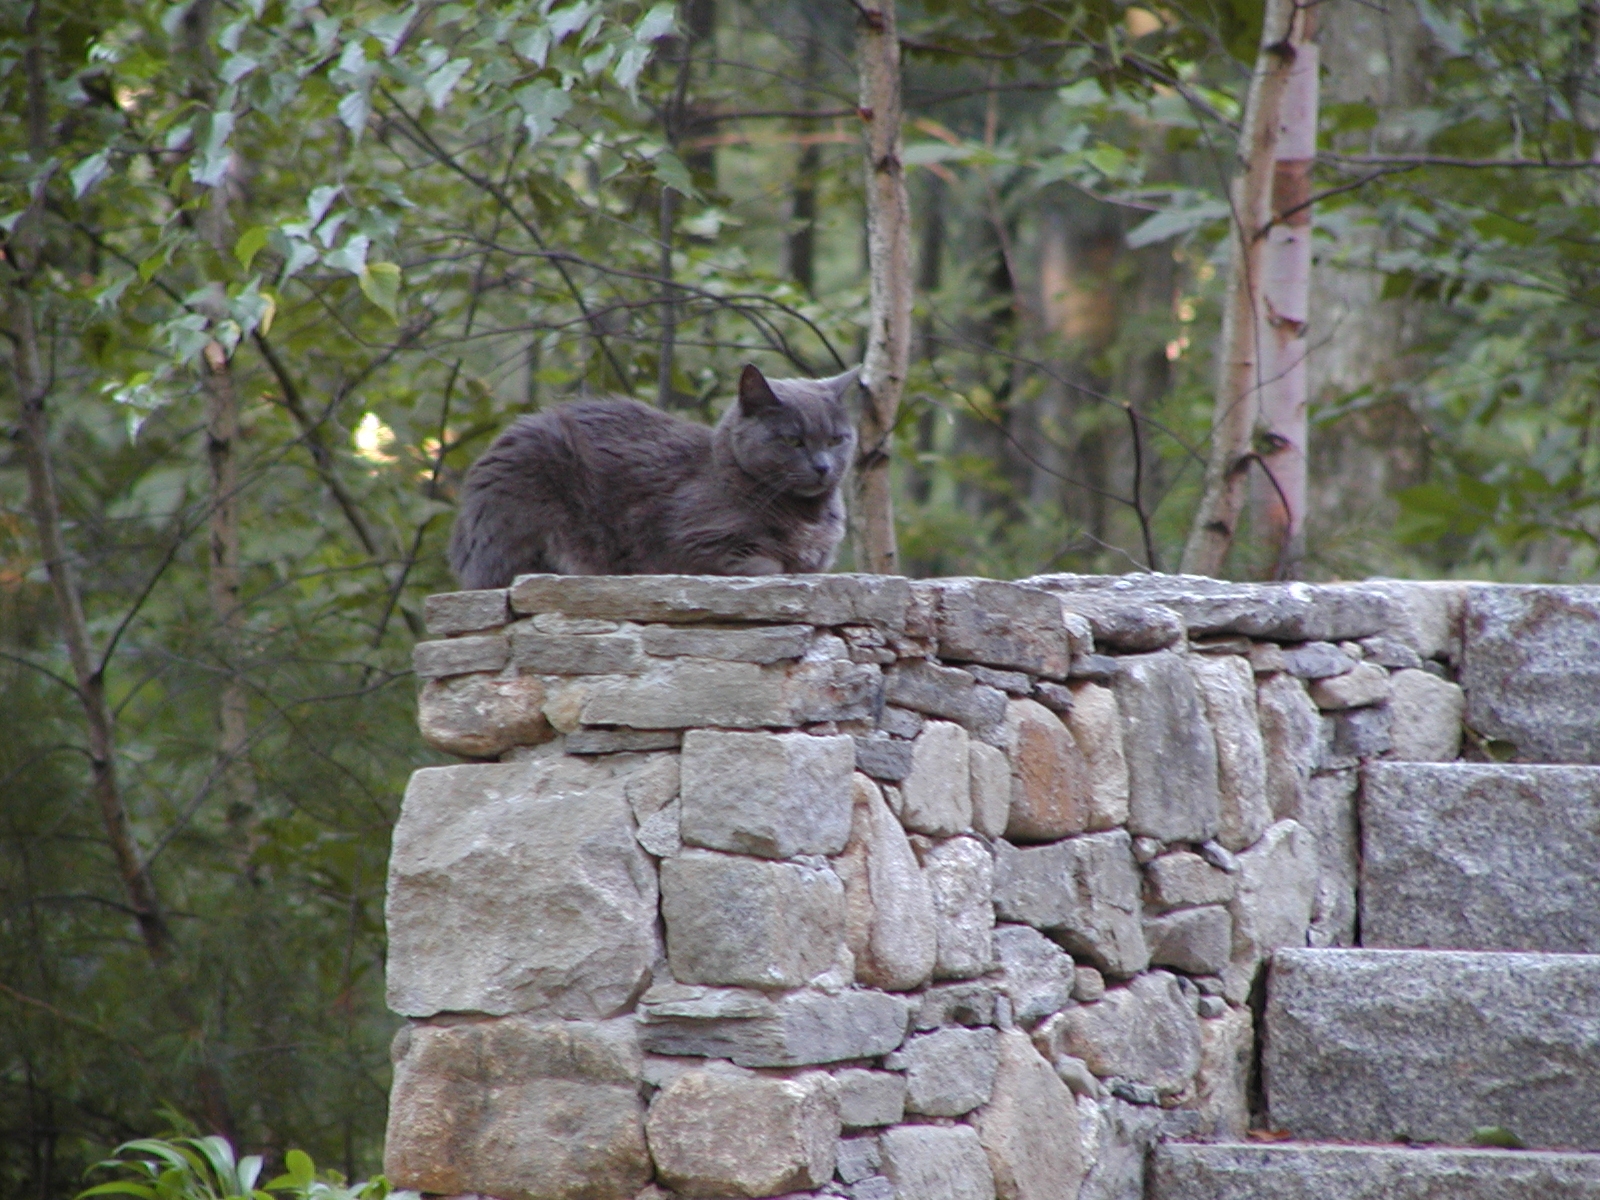 Some people have stone lions upon their stairs, we have gray and grumpy....